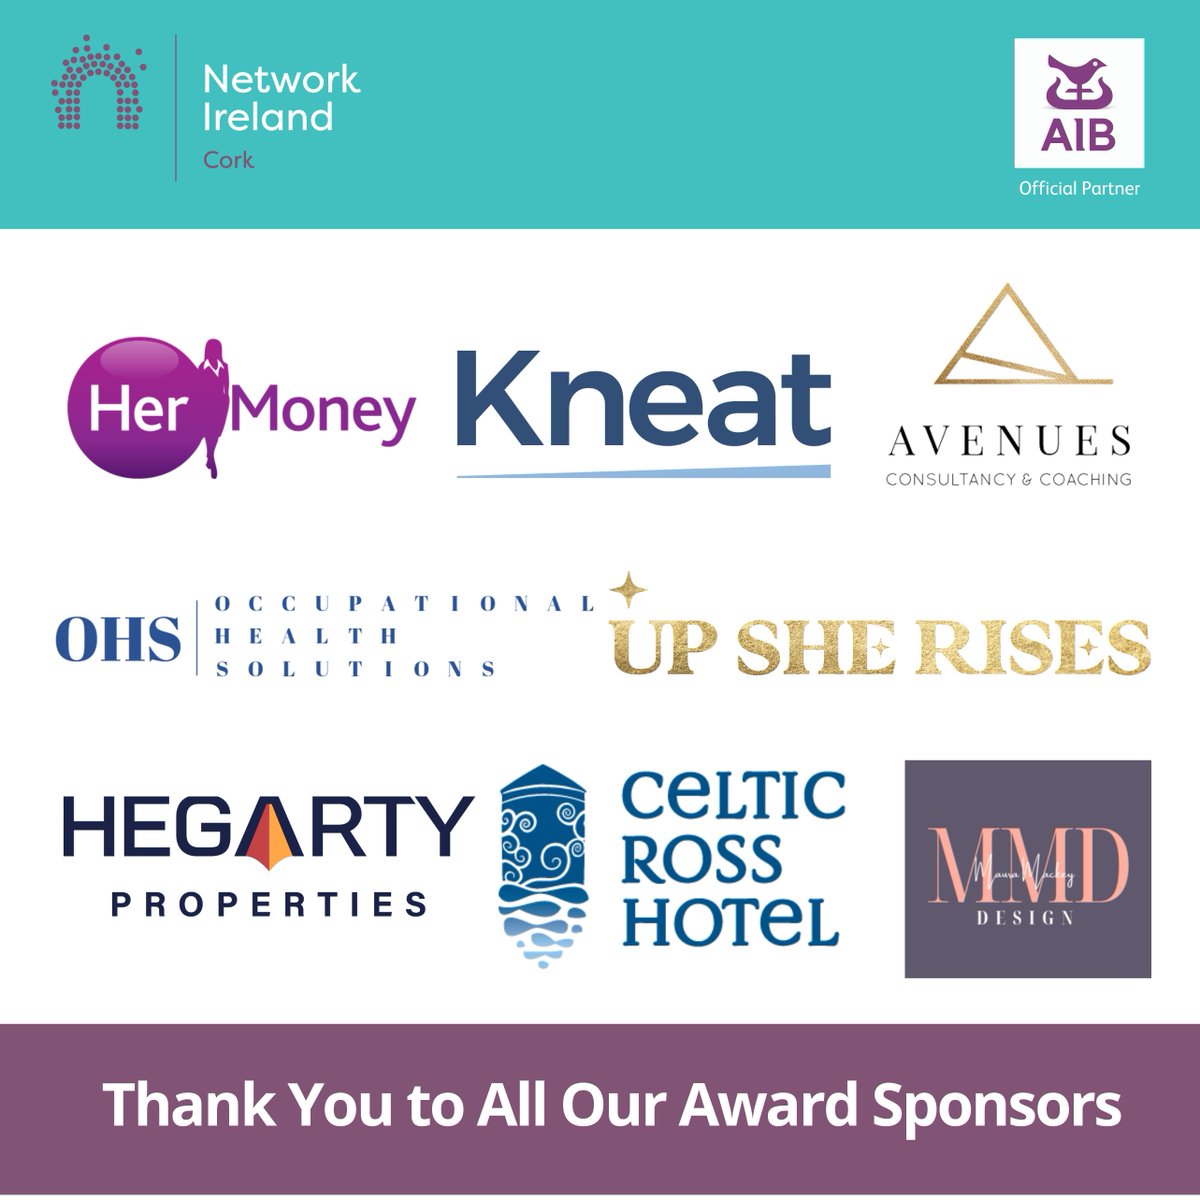 Big thanks to our sponsors for making the Businesswoman of the Year Awards possible!🌟 🌟@OccupationalH14 🌟@AdriannaHegarty 🌟@upsherises_ie 🌟@KneatSoftware 🌟@maura_mackey 🌟@CelticRossHotel 🌟Avenues Consultancy & Coaching 🌟@HerMoneyCWM 🎟️Book Now: bit.ly/44hfBkv